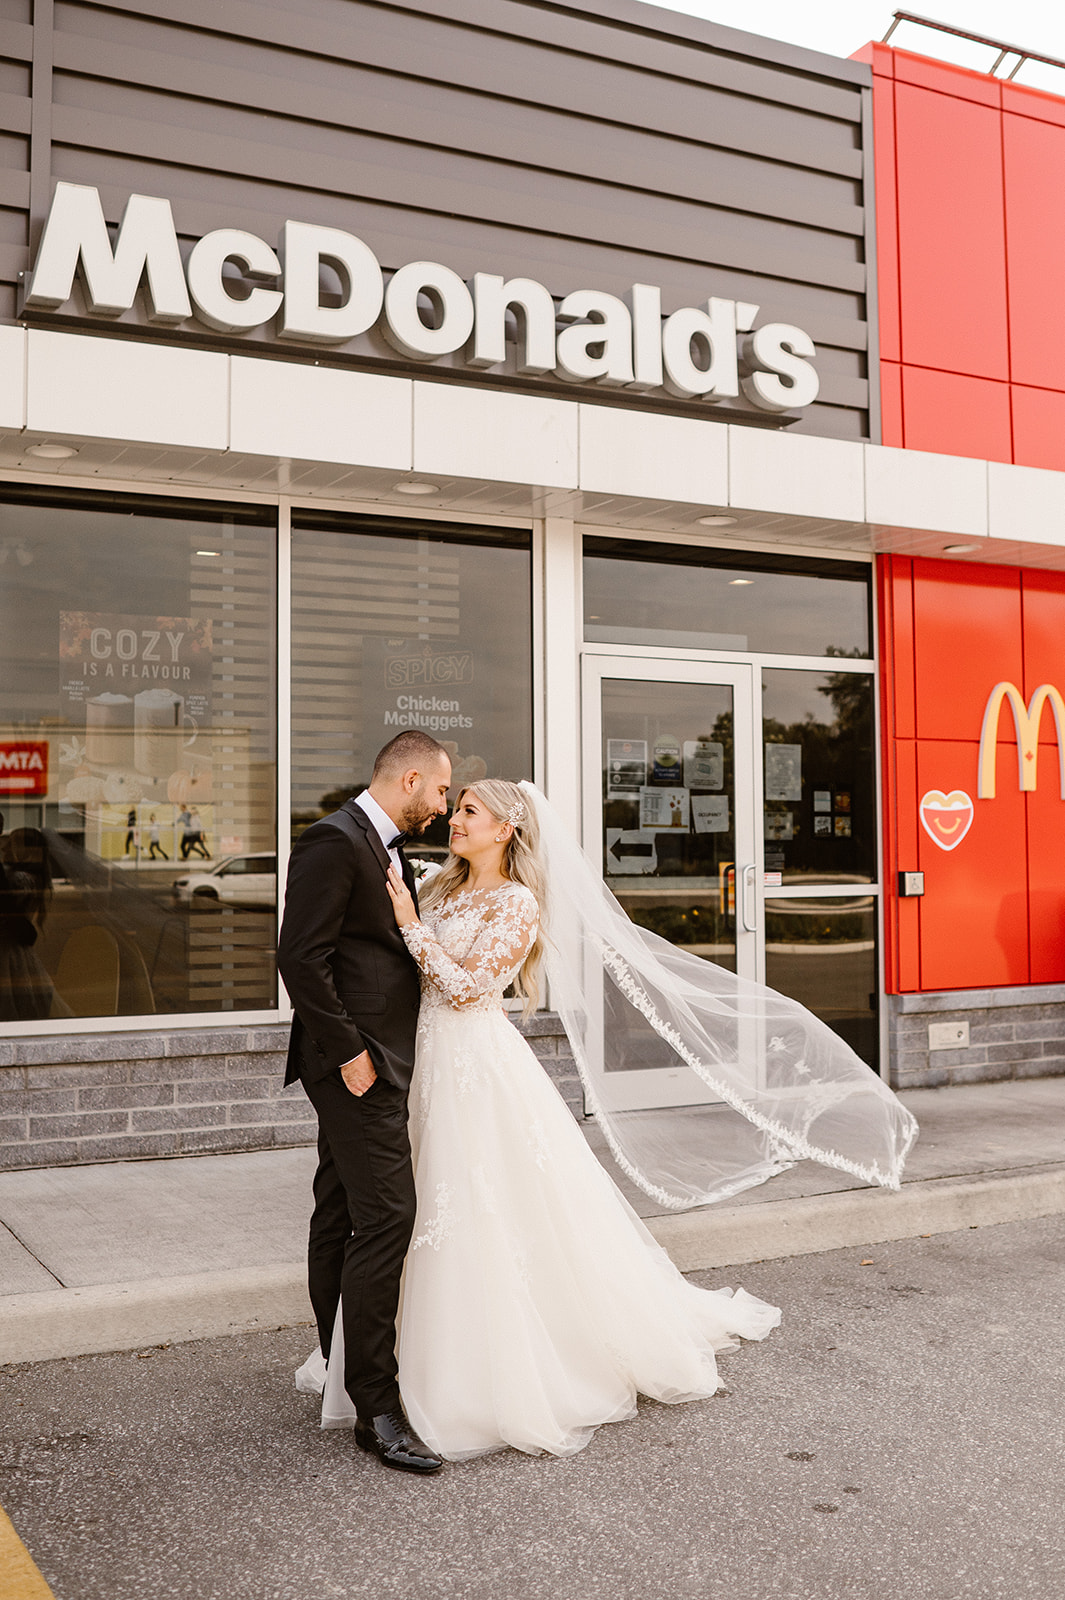 Bride and Groom make a stop at McDonalds on their wedding day